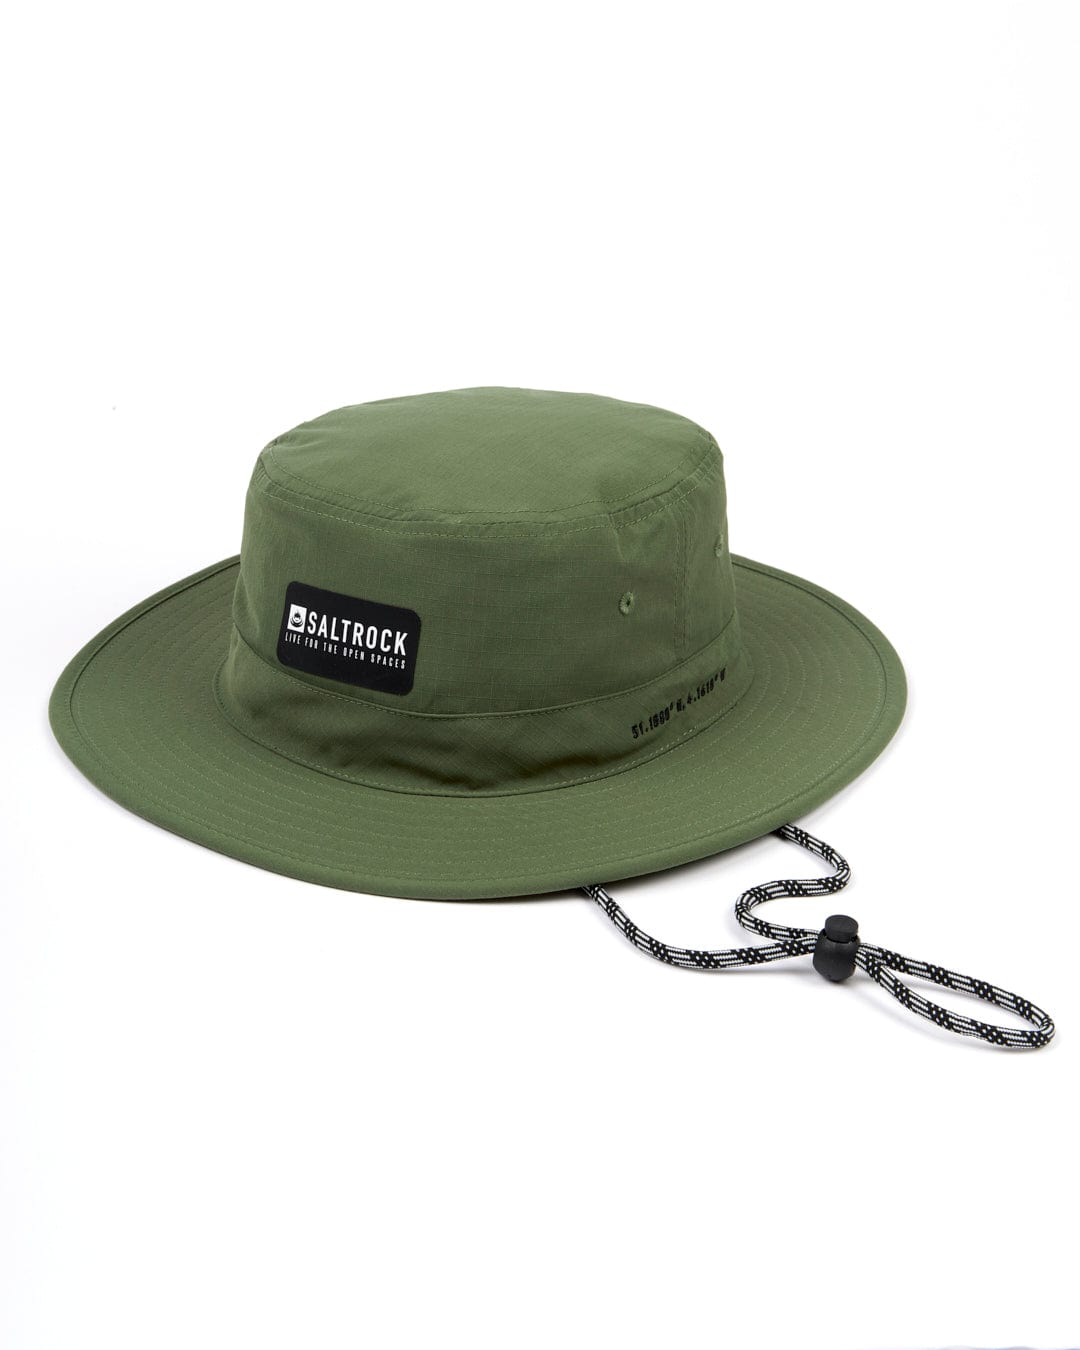 A Saltrock green bucket hat with an adjustable drawstring chin strap attached.